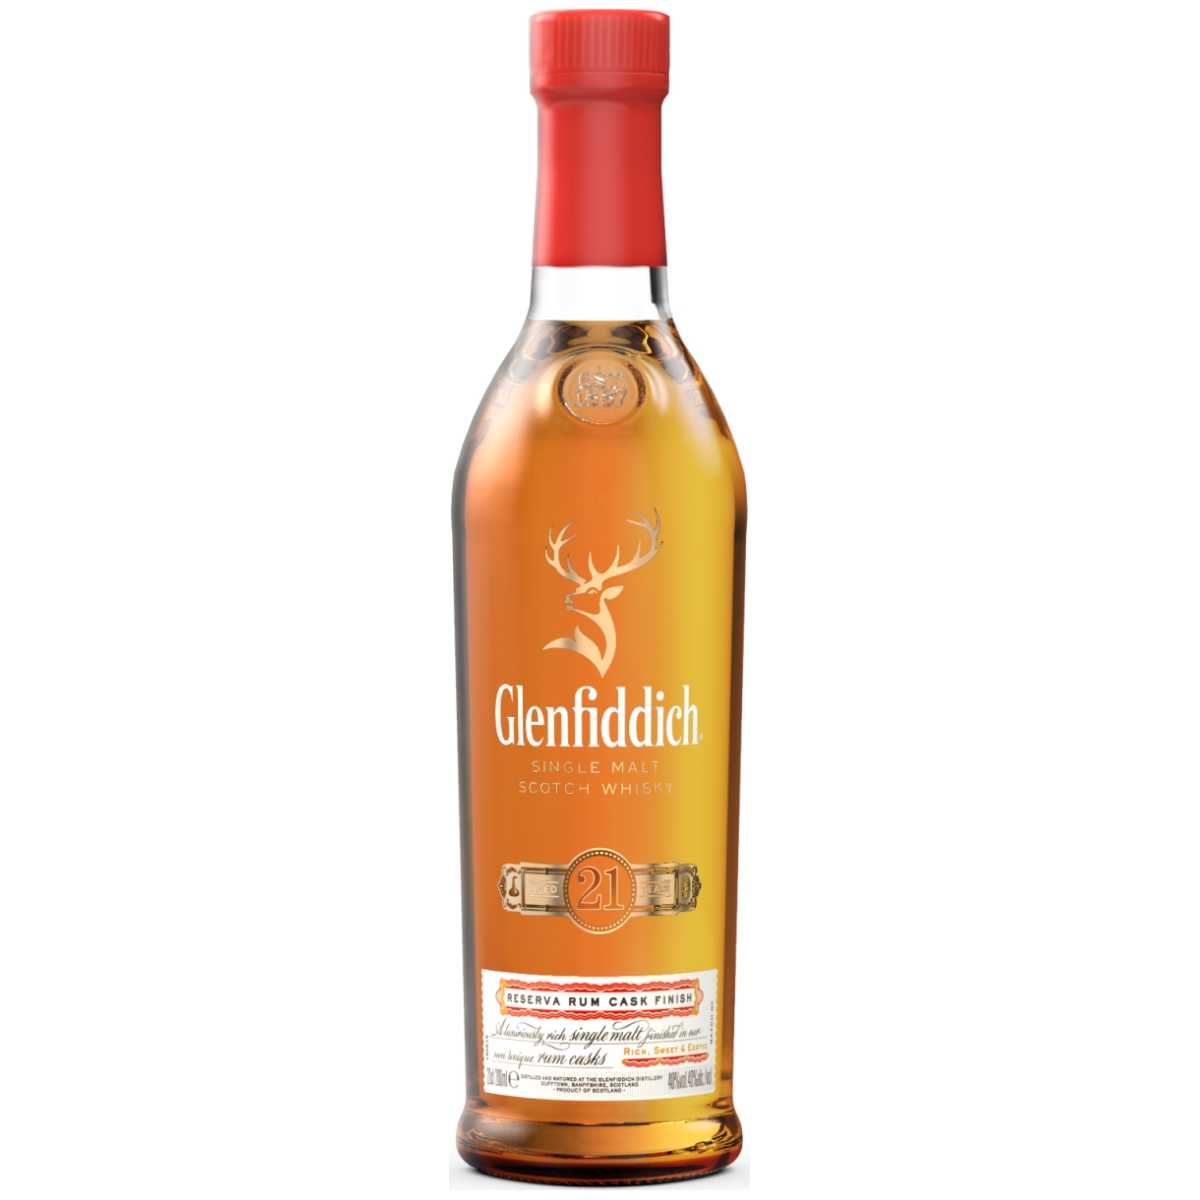 Glenfiddich 21 years old 20cl